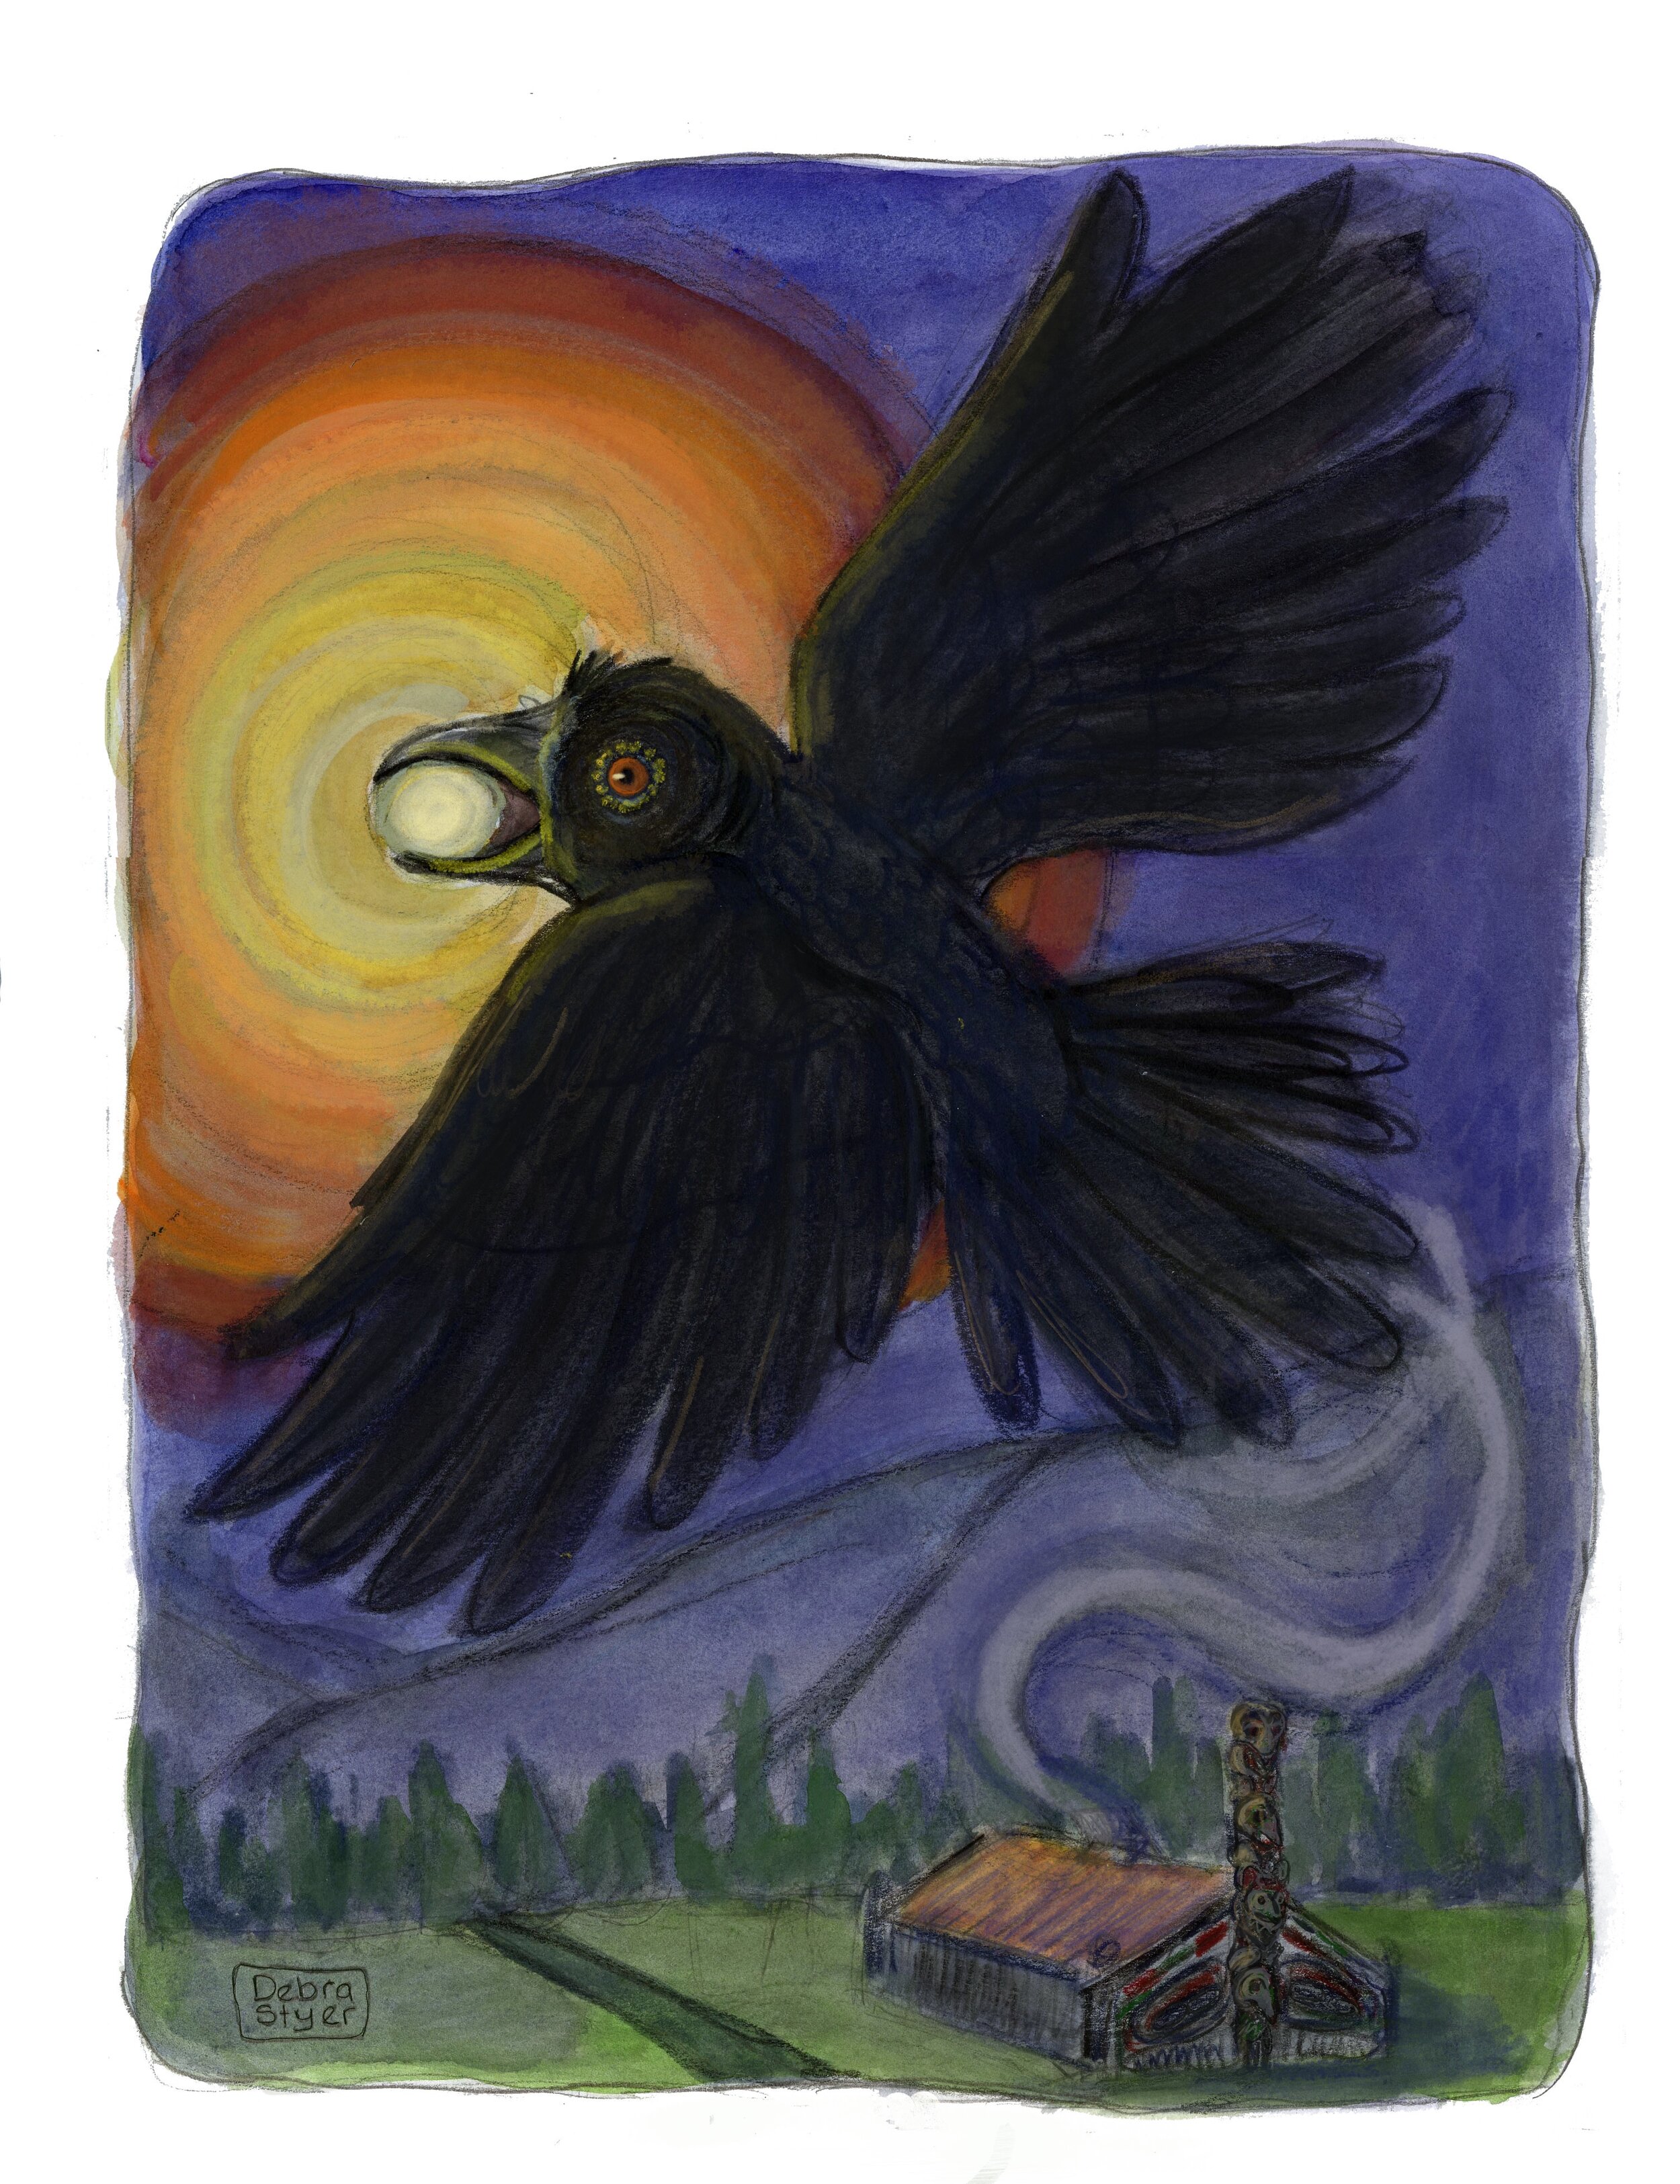 Solstice: (The Raven that Stole the Sun)